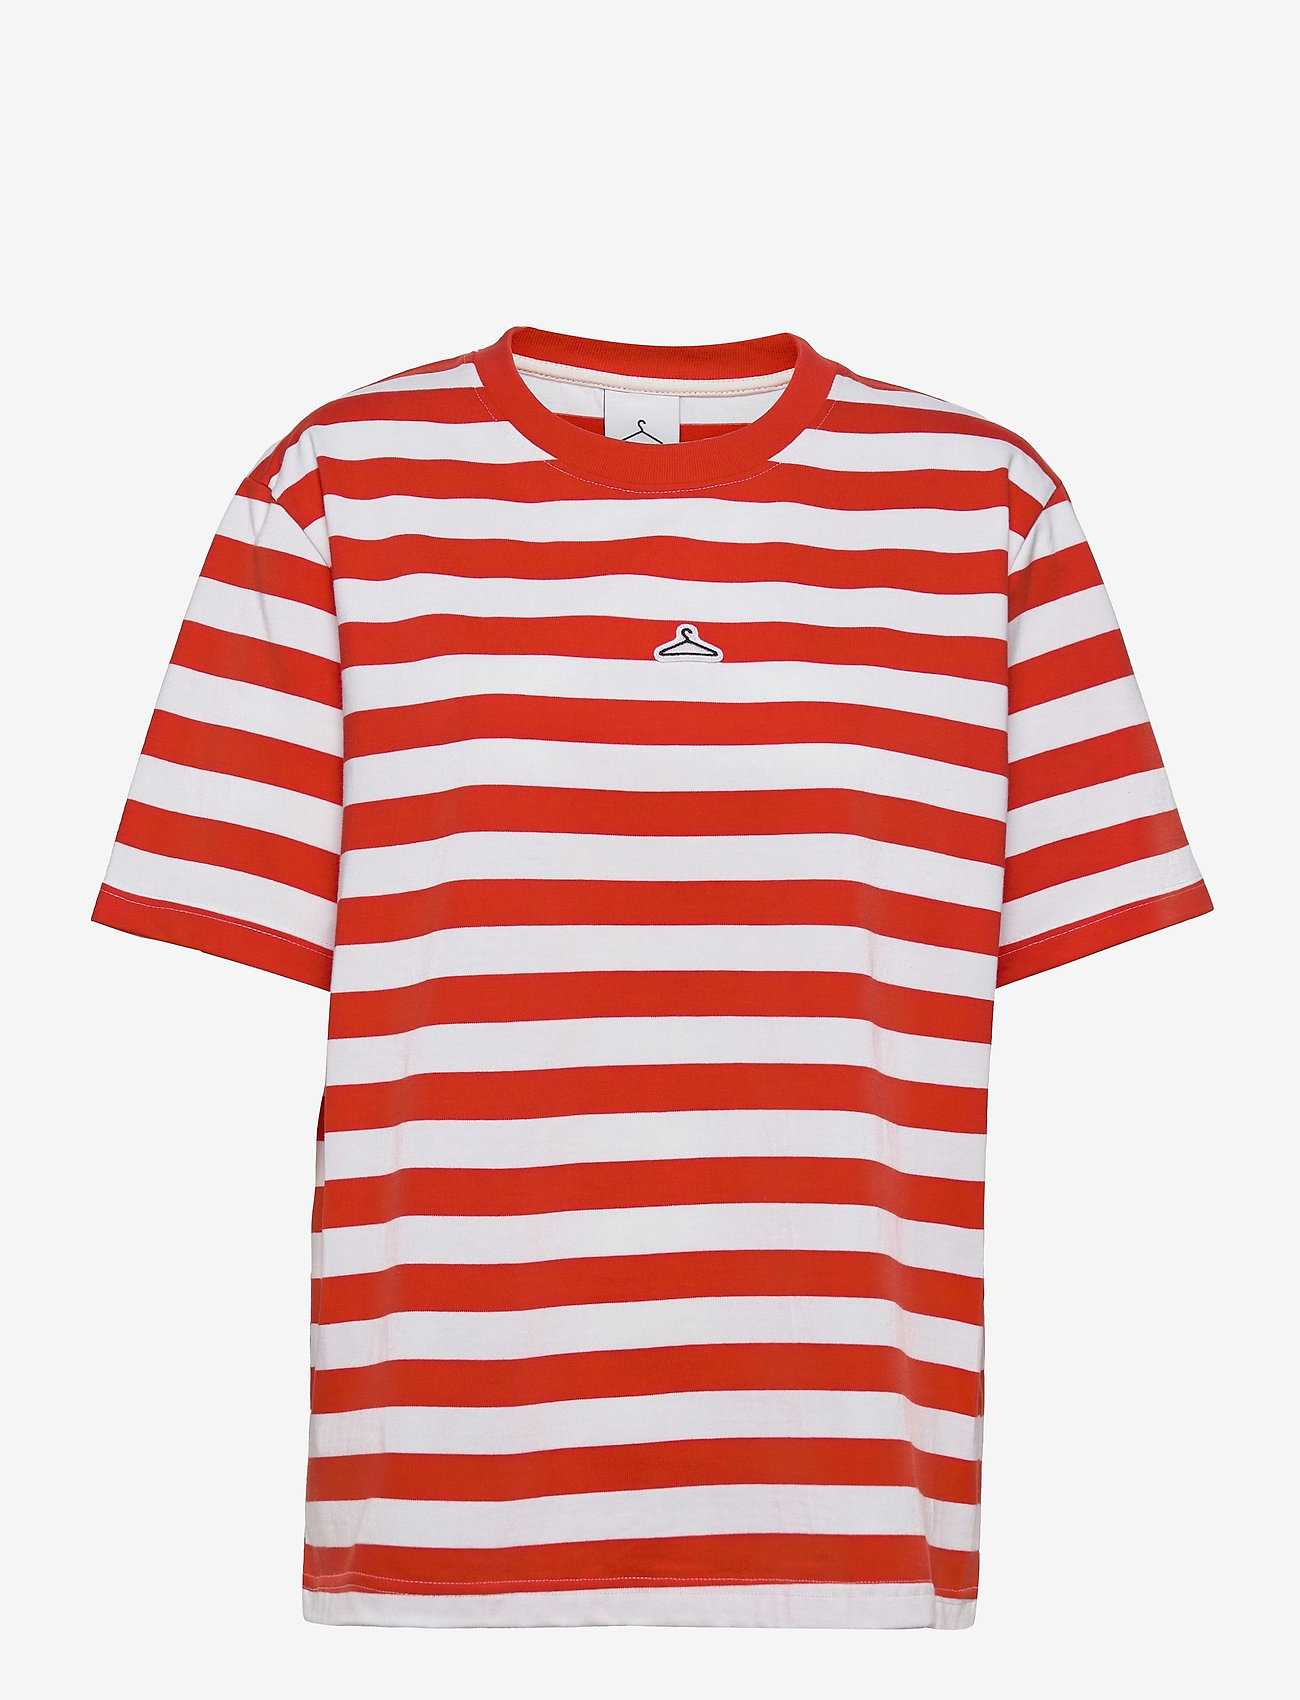 Hanger by Holzweiler - Hanger Striped Tee - t-shirts - red white 1664 - 1